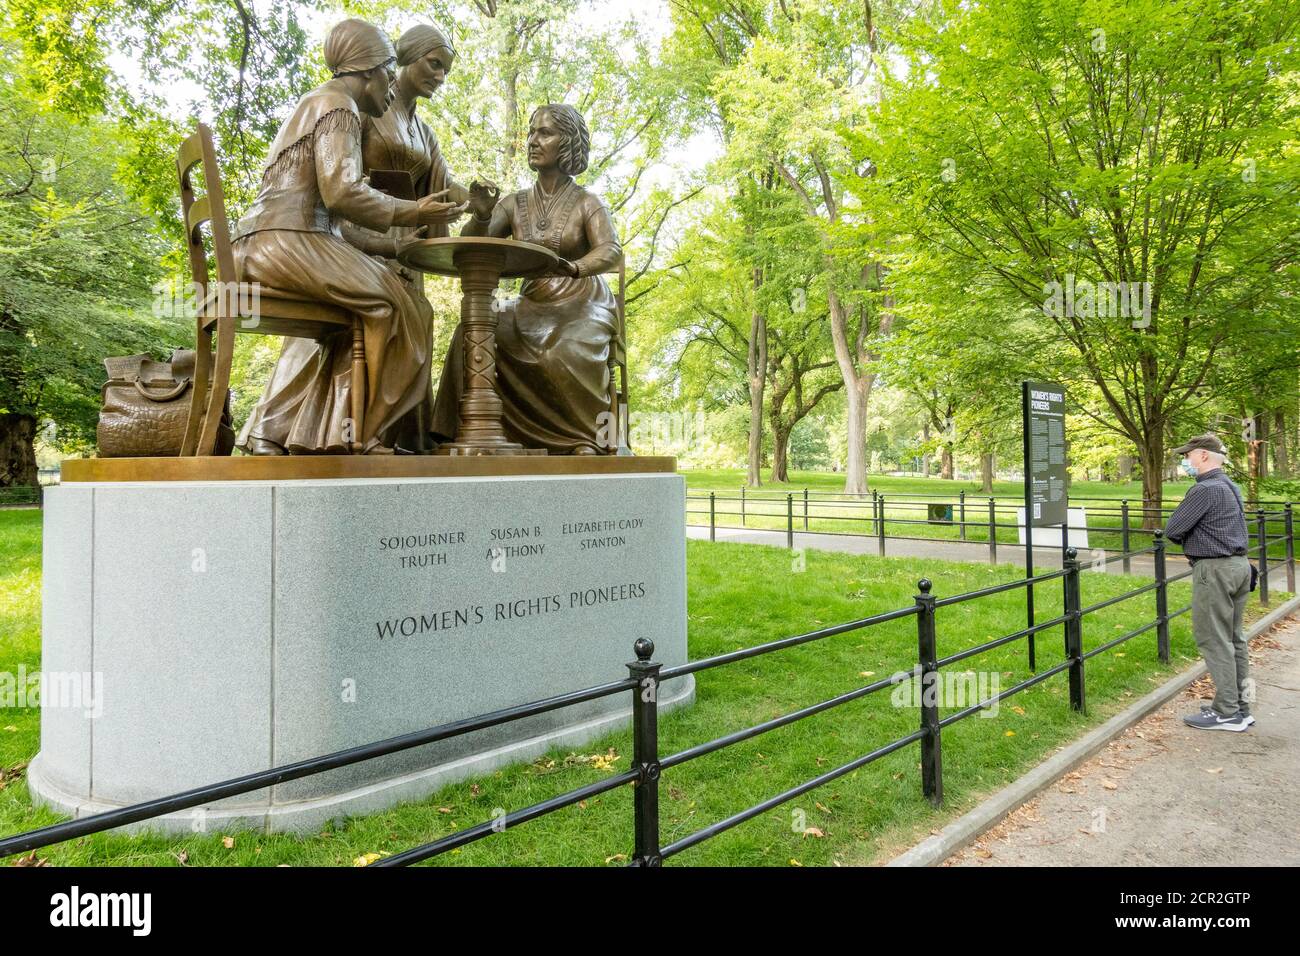 Women's Rights Pioneers monument located on Literary Walk in Central Park, New York City, USA Stock Photo